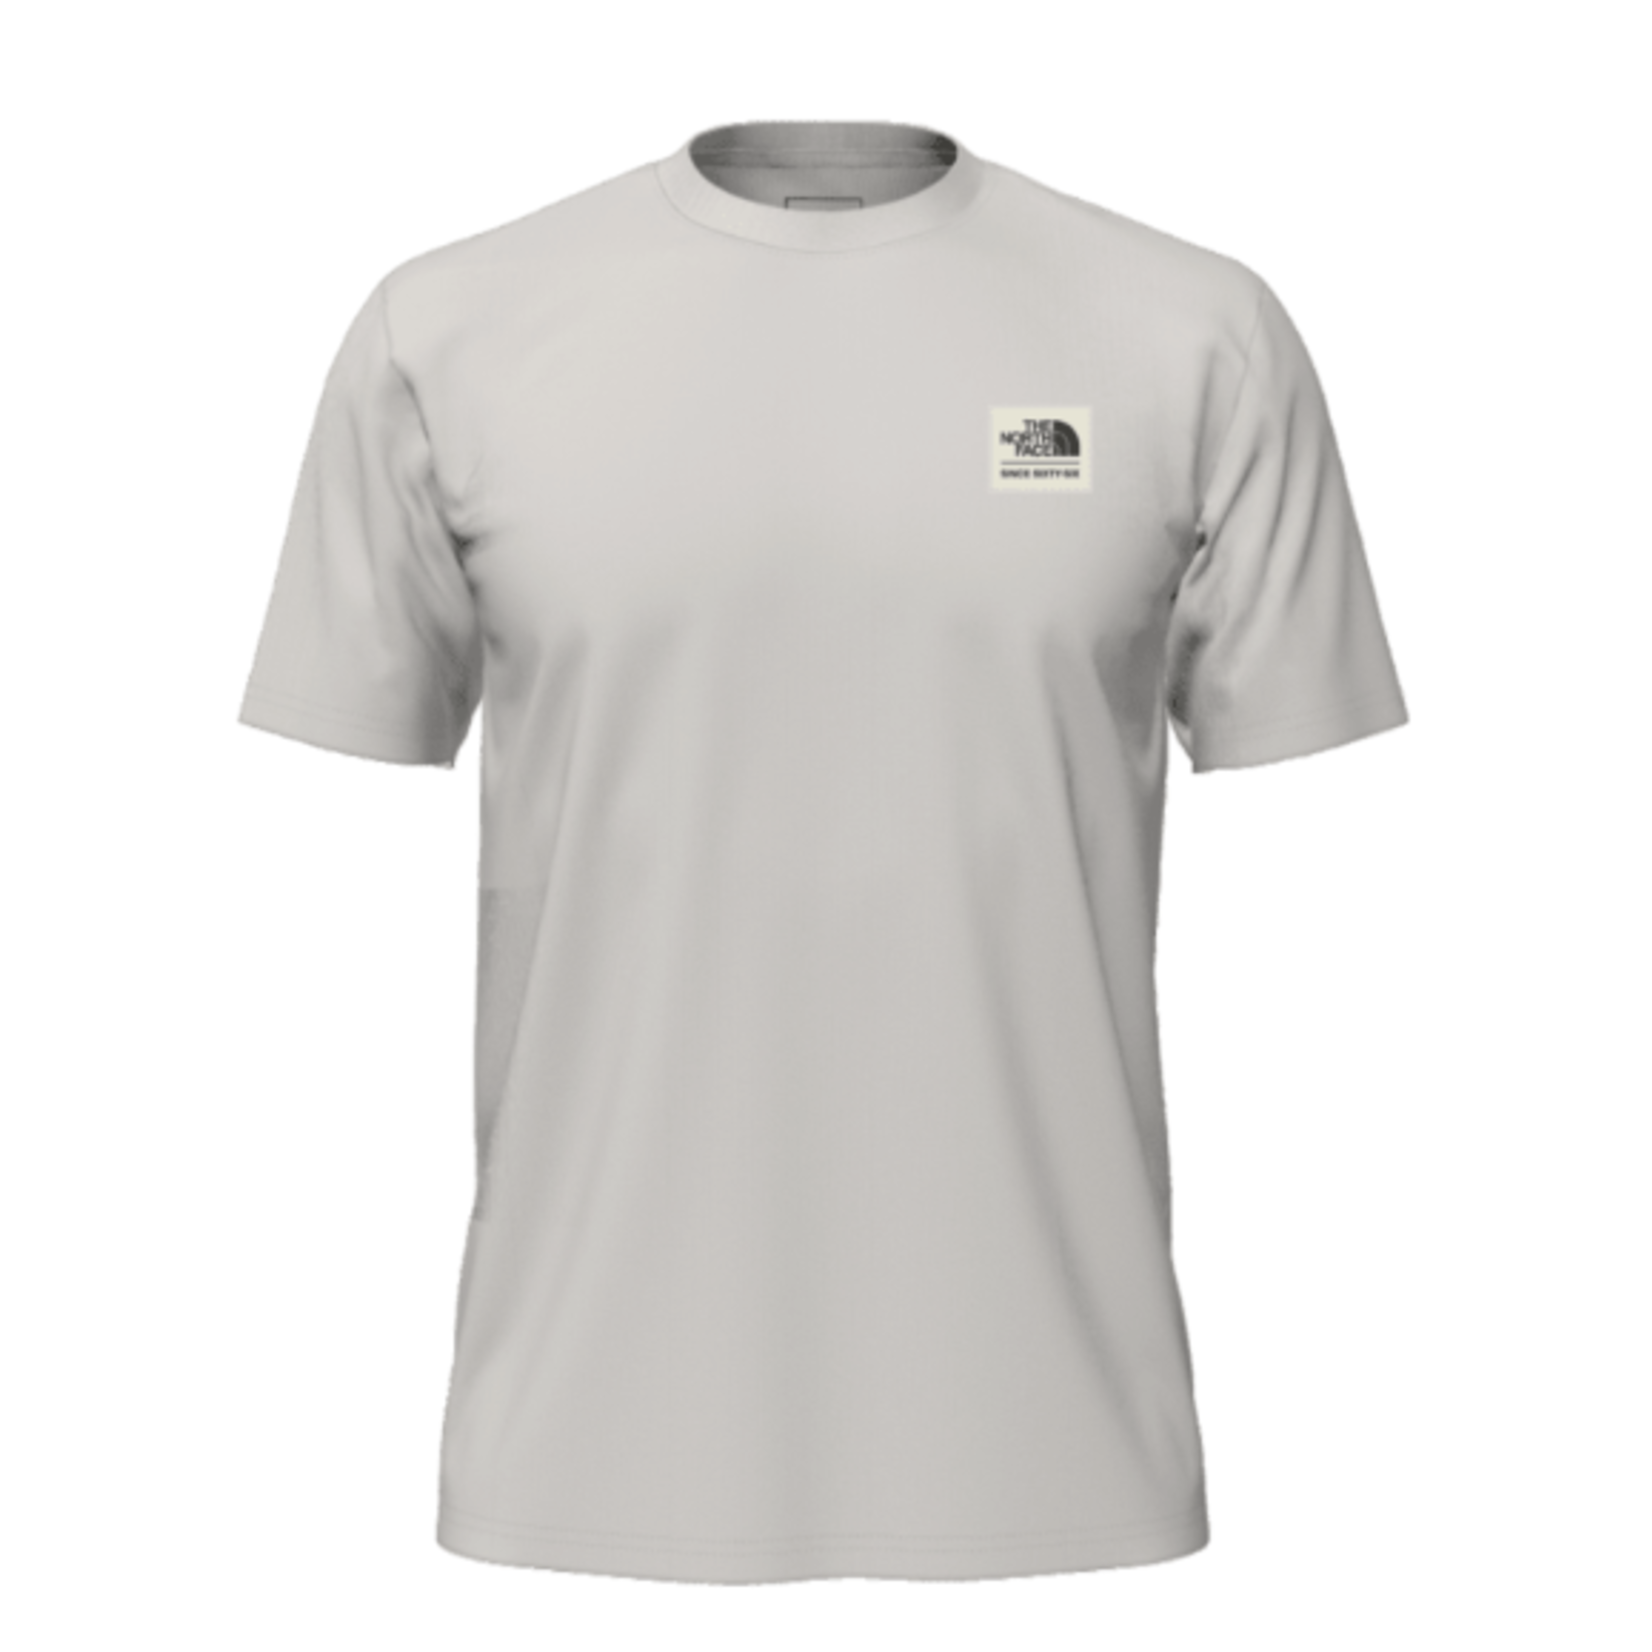 The North Face The North Face T-Shirt, Heritage Patch Heathered Tee, Mens